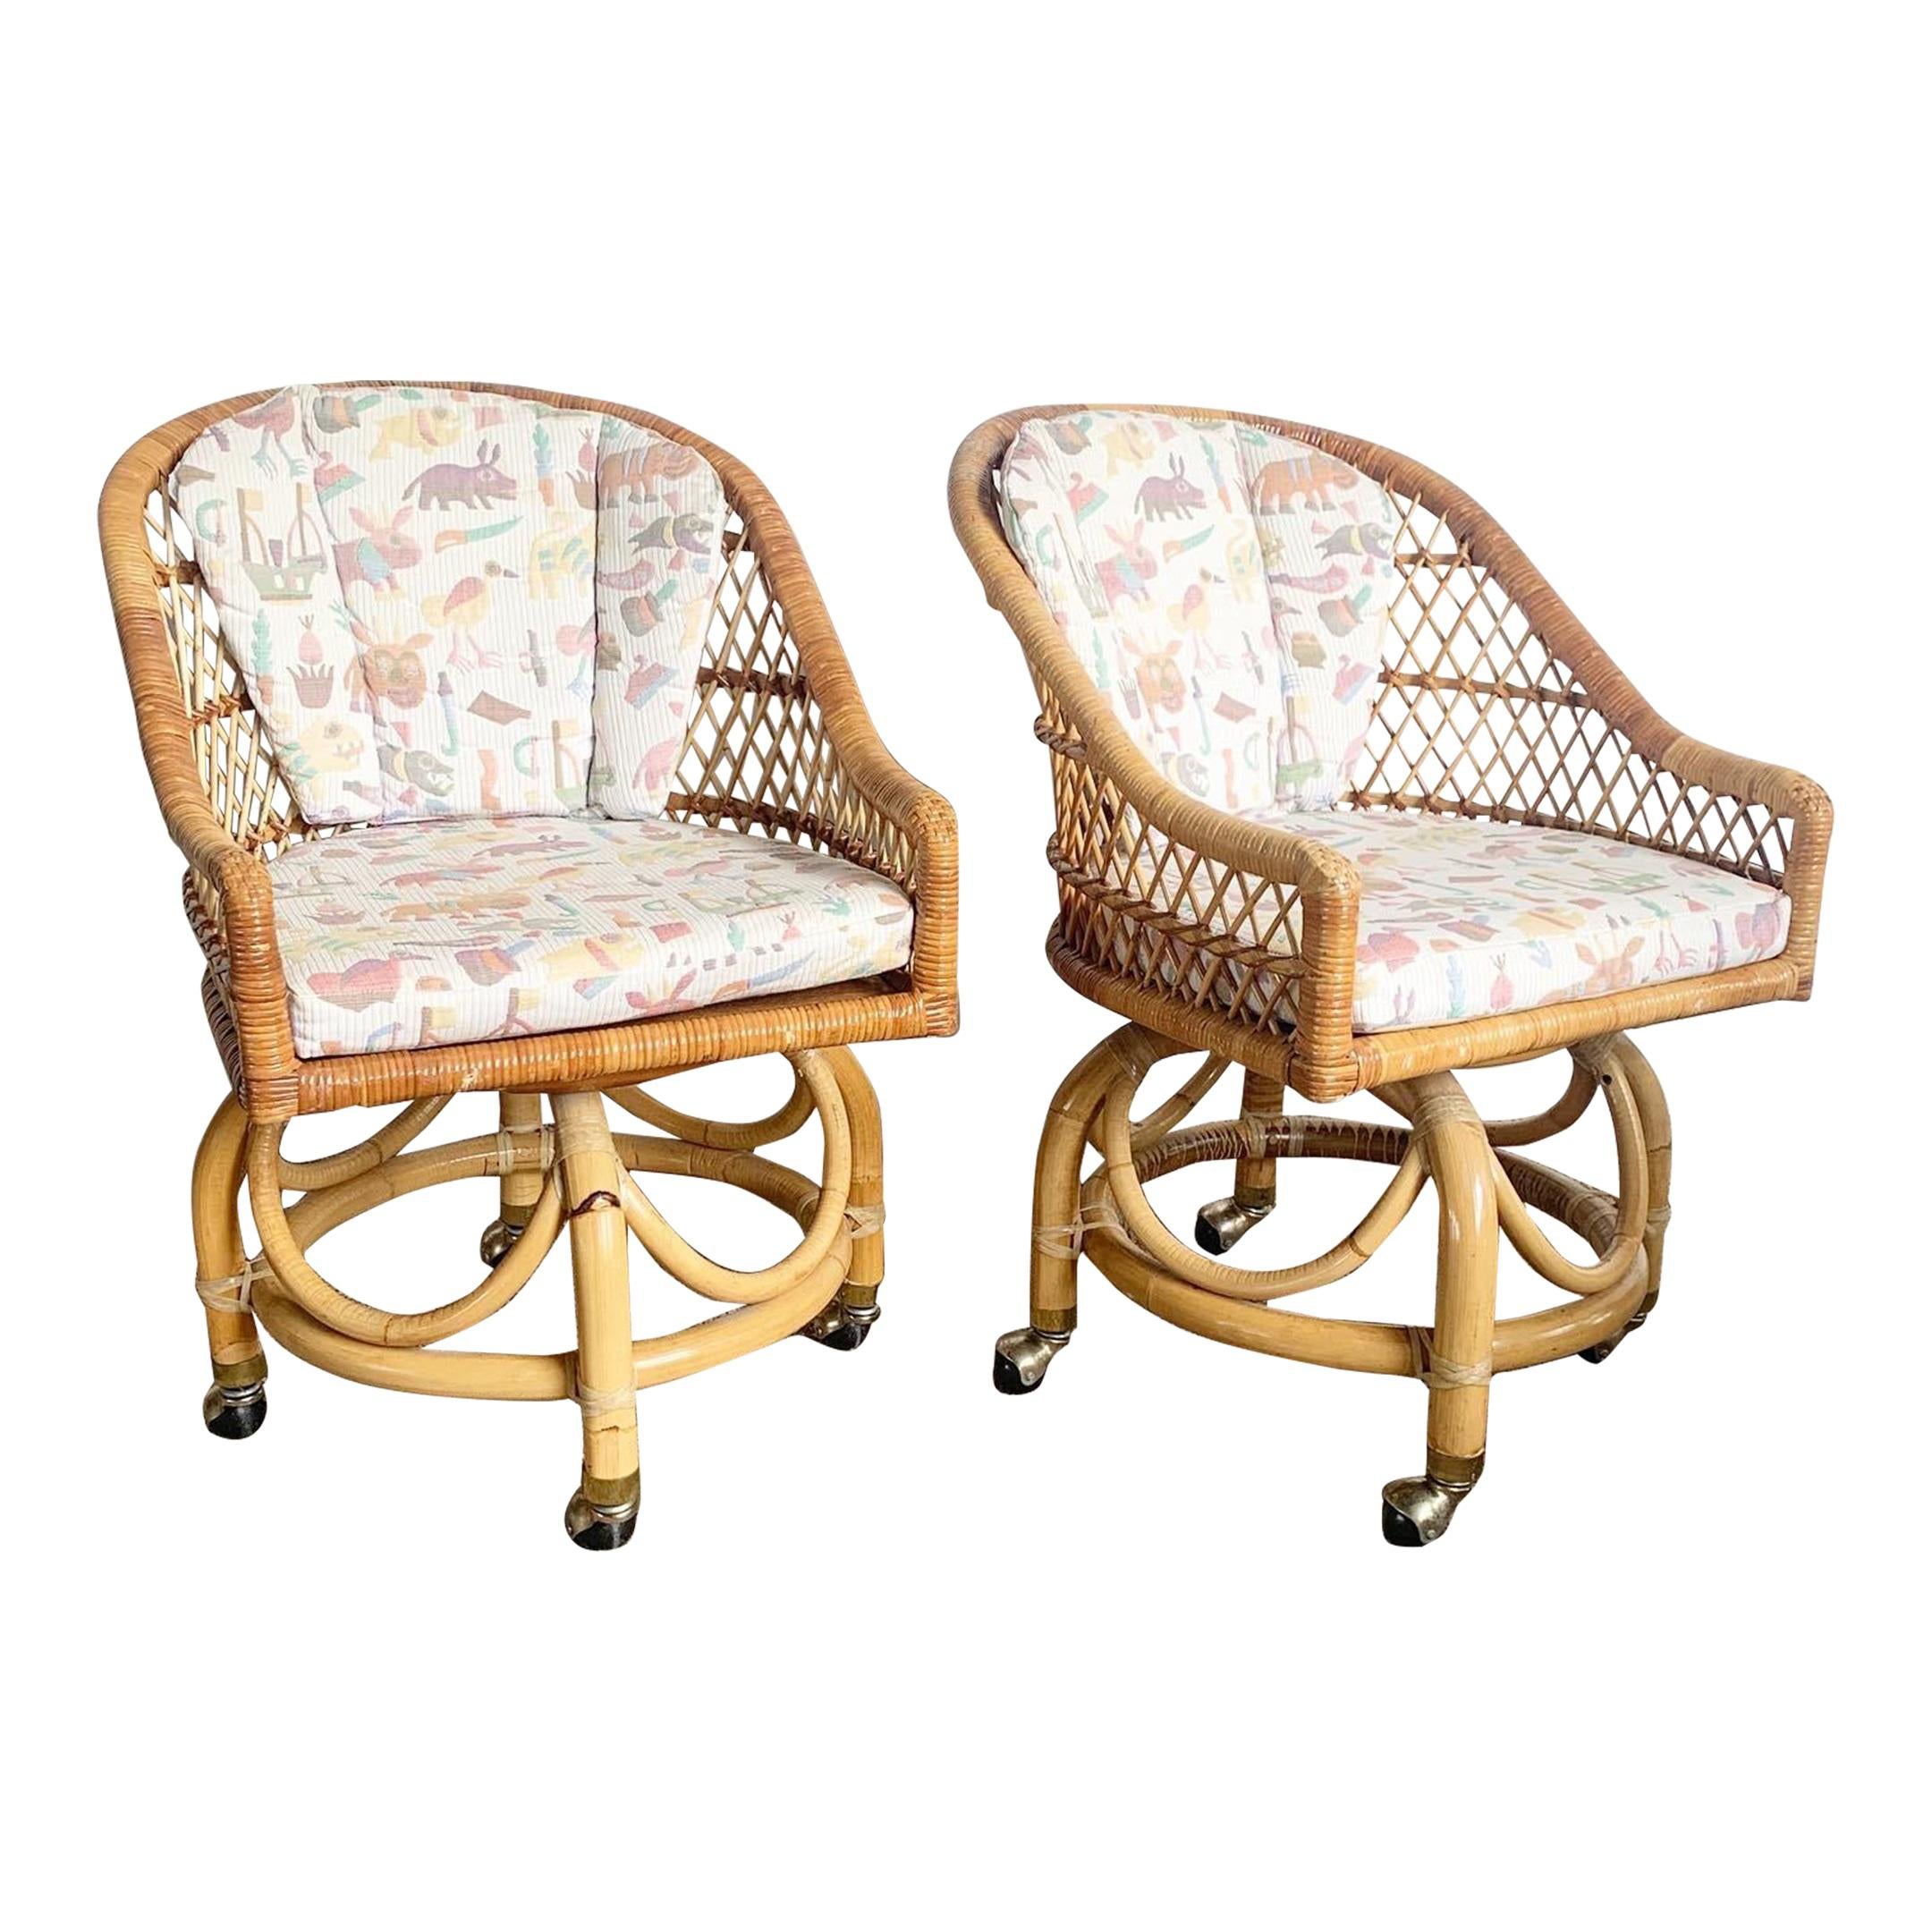 Boho Chic Buri Rattan Swivel Dining Chairs With Multi Color Animal Upholstery For Sale